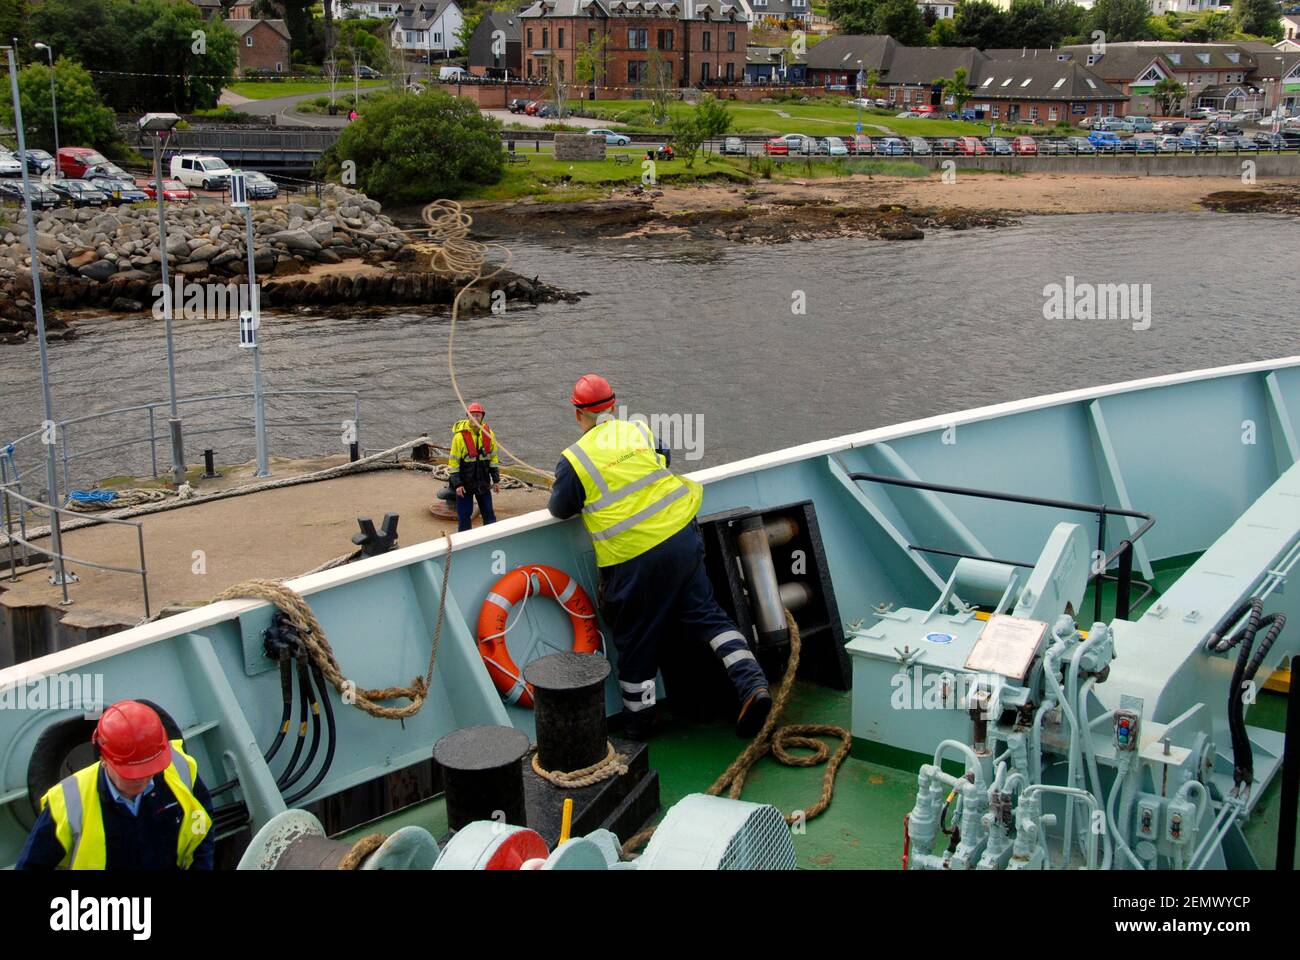 Seaman throwing a line from ship to shore as vessel docks, Brodick, Isle of Arran, Scotland Stock Photo